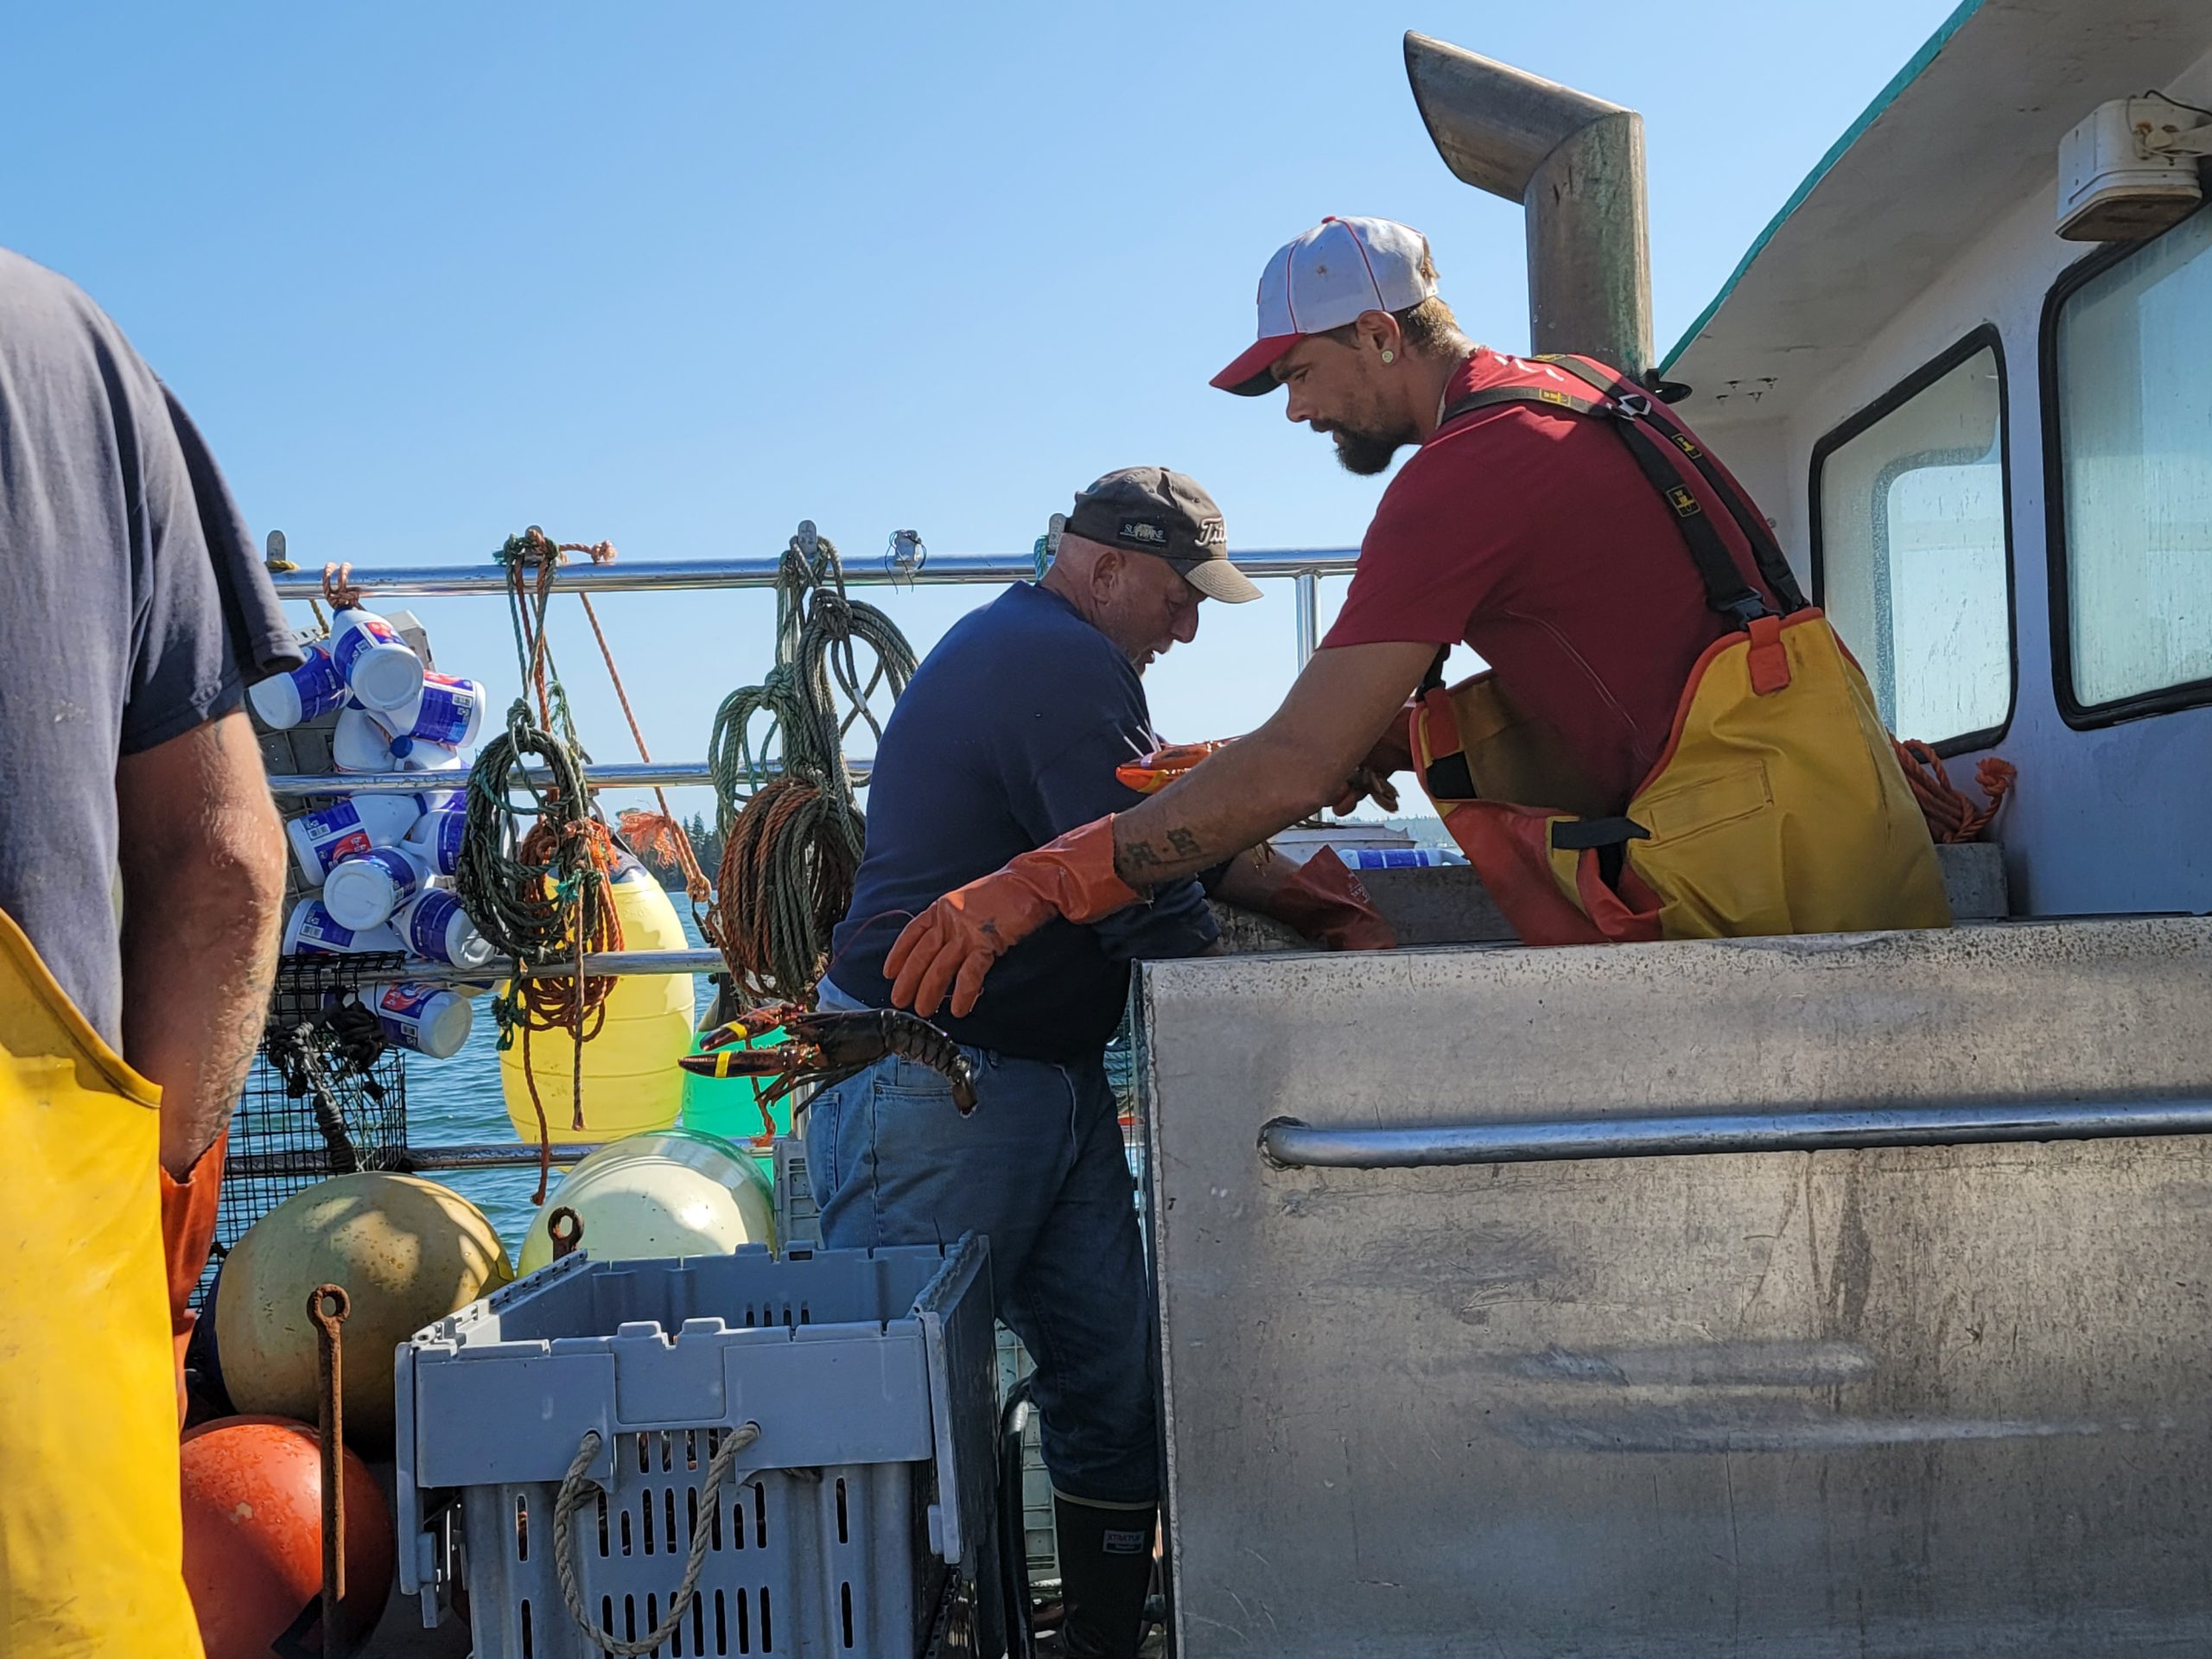 Union lobstermen aboard a fishing vessel toss their fresh catches into a basket